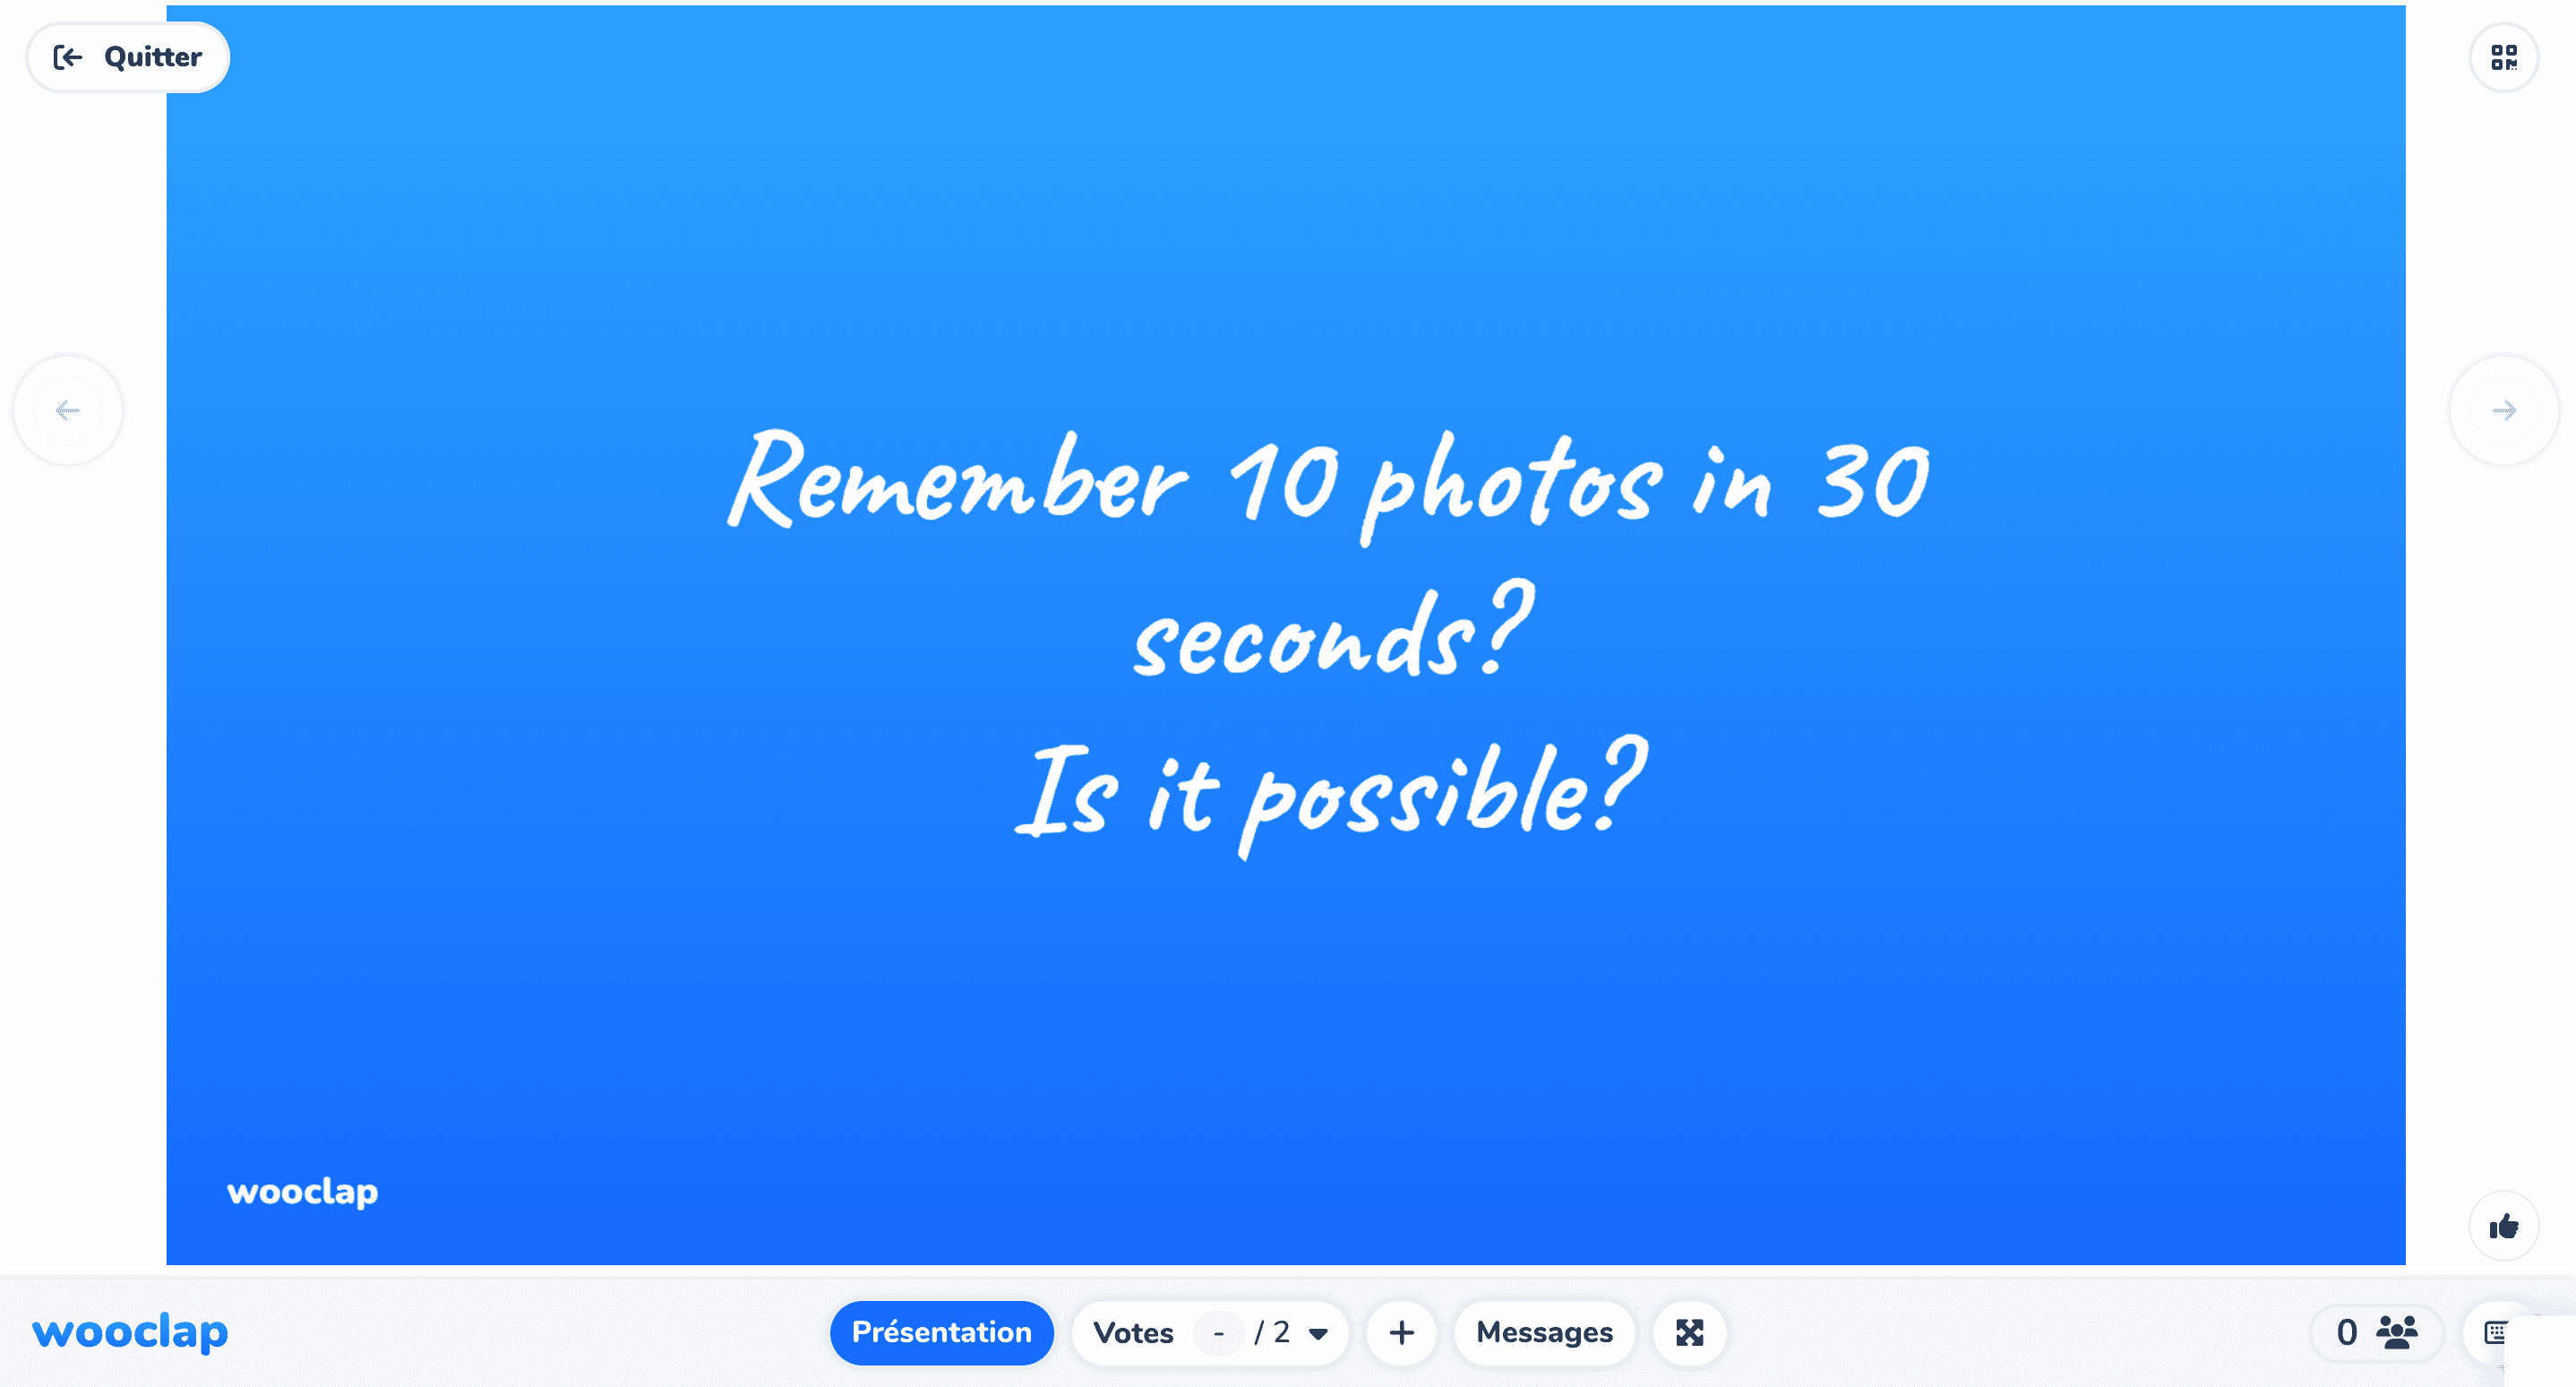 Remembre 10 photos in 30 seconds? Is it possible? 